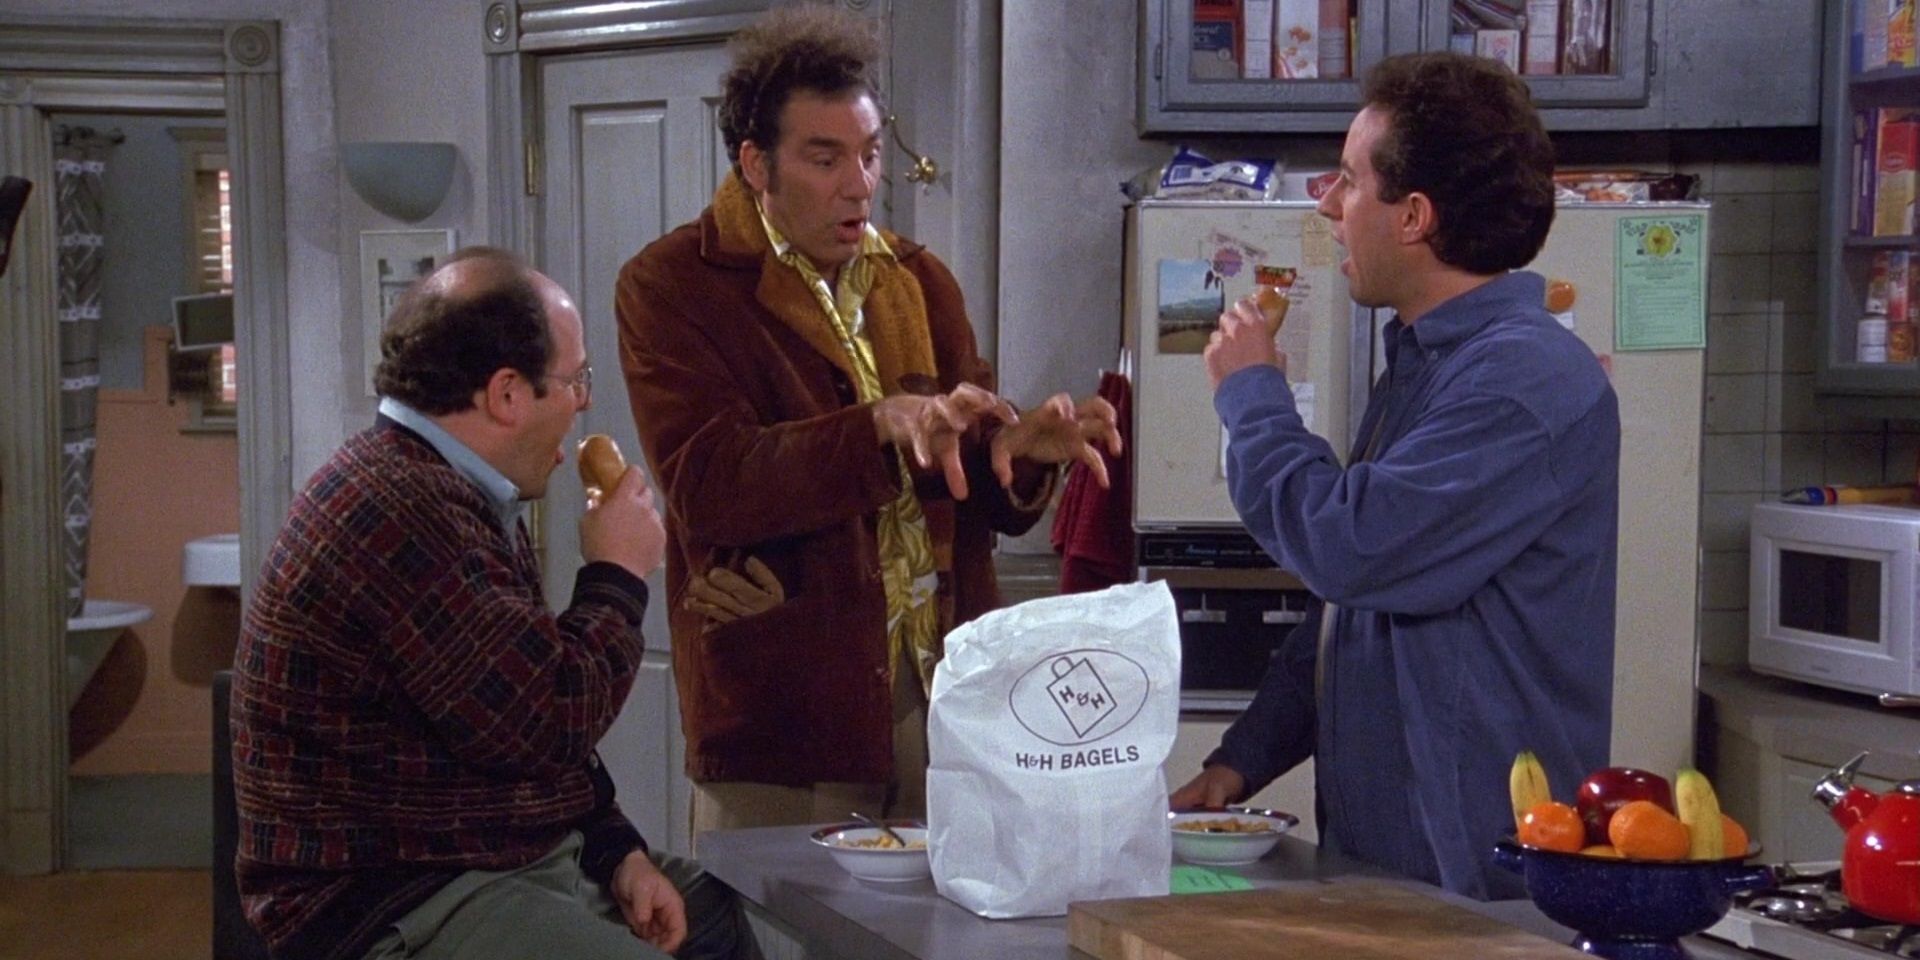 George, Kramer and Jerry in Jerry's kitchen in The Strike episode of Seinfeld.